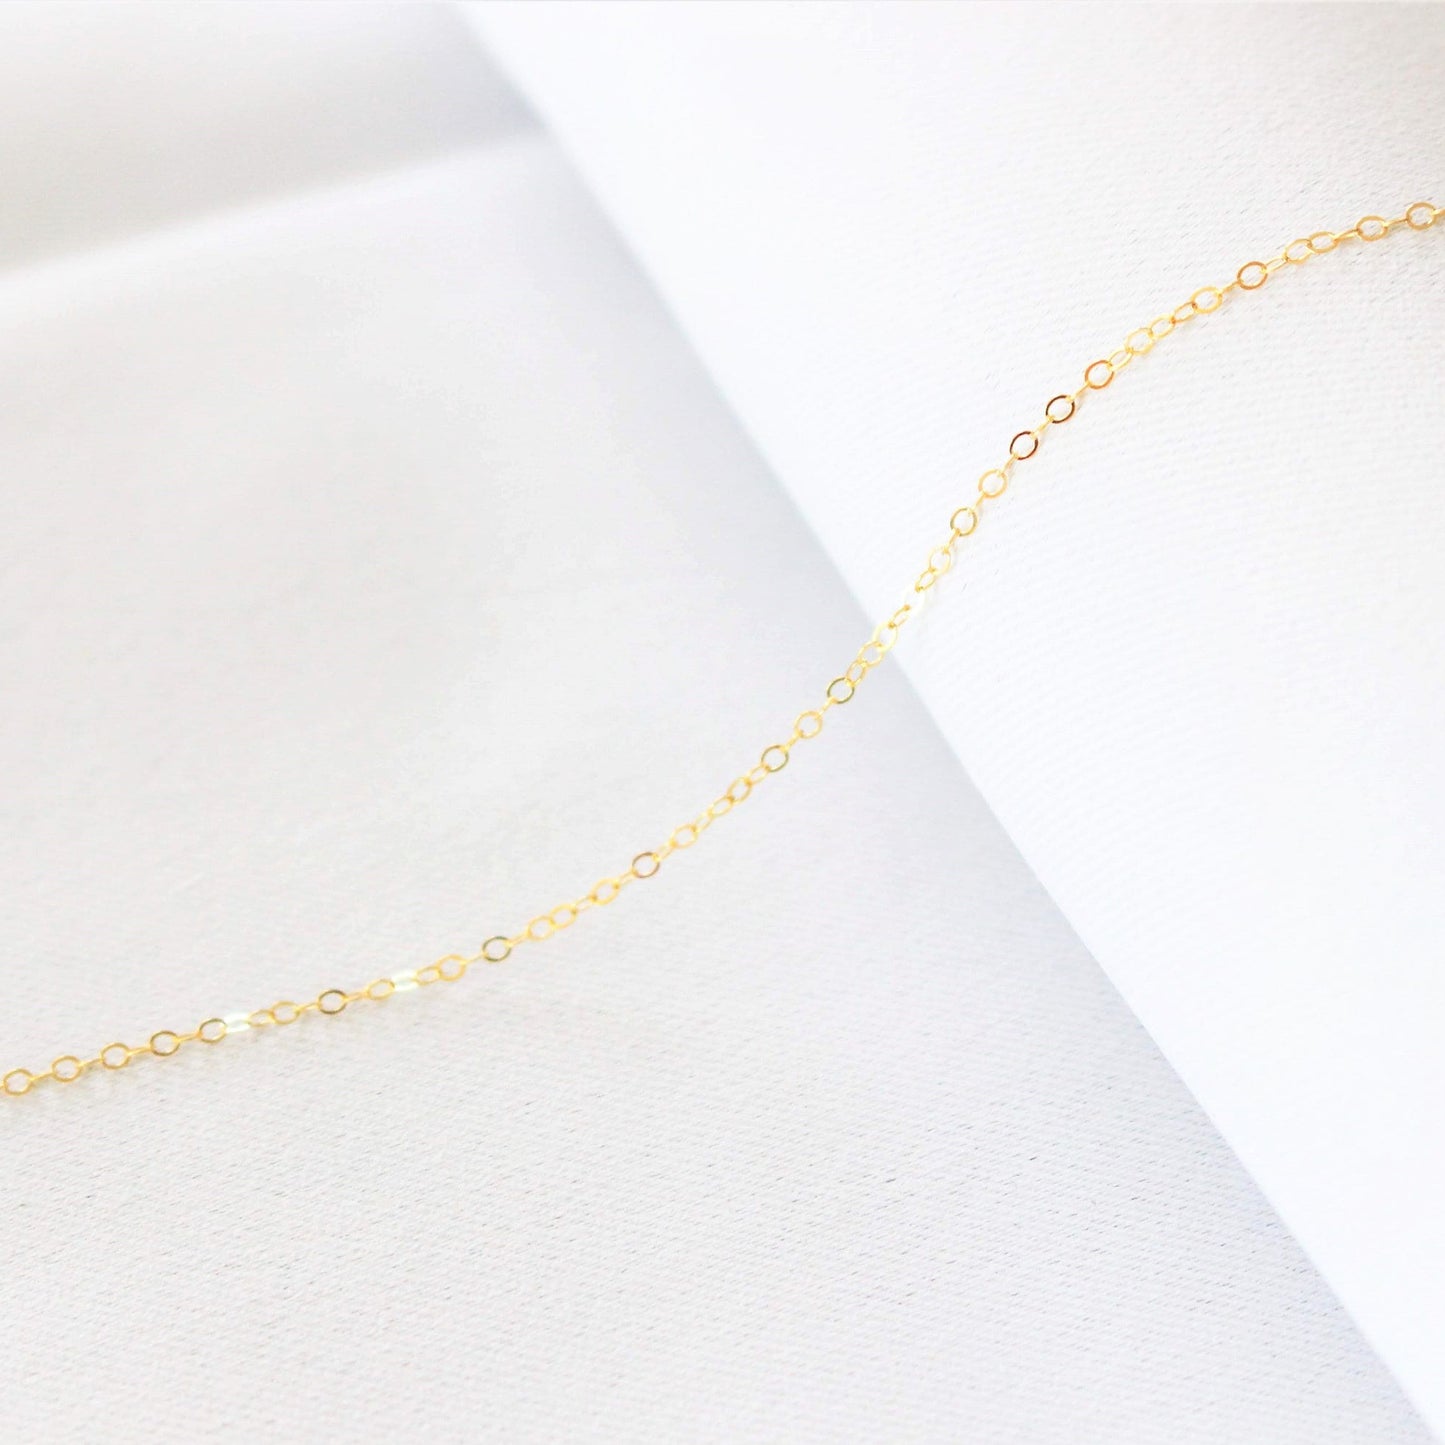 14k gold filled flat cable chain · 14 to 20'' · Gold fill necklace · Choker necklace · Minimalist chain for women